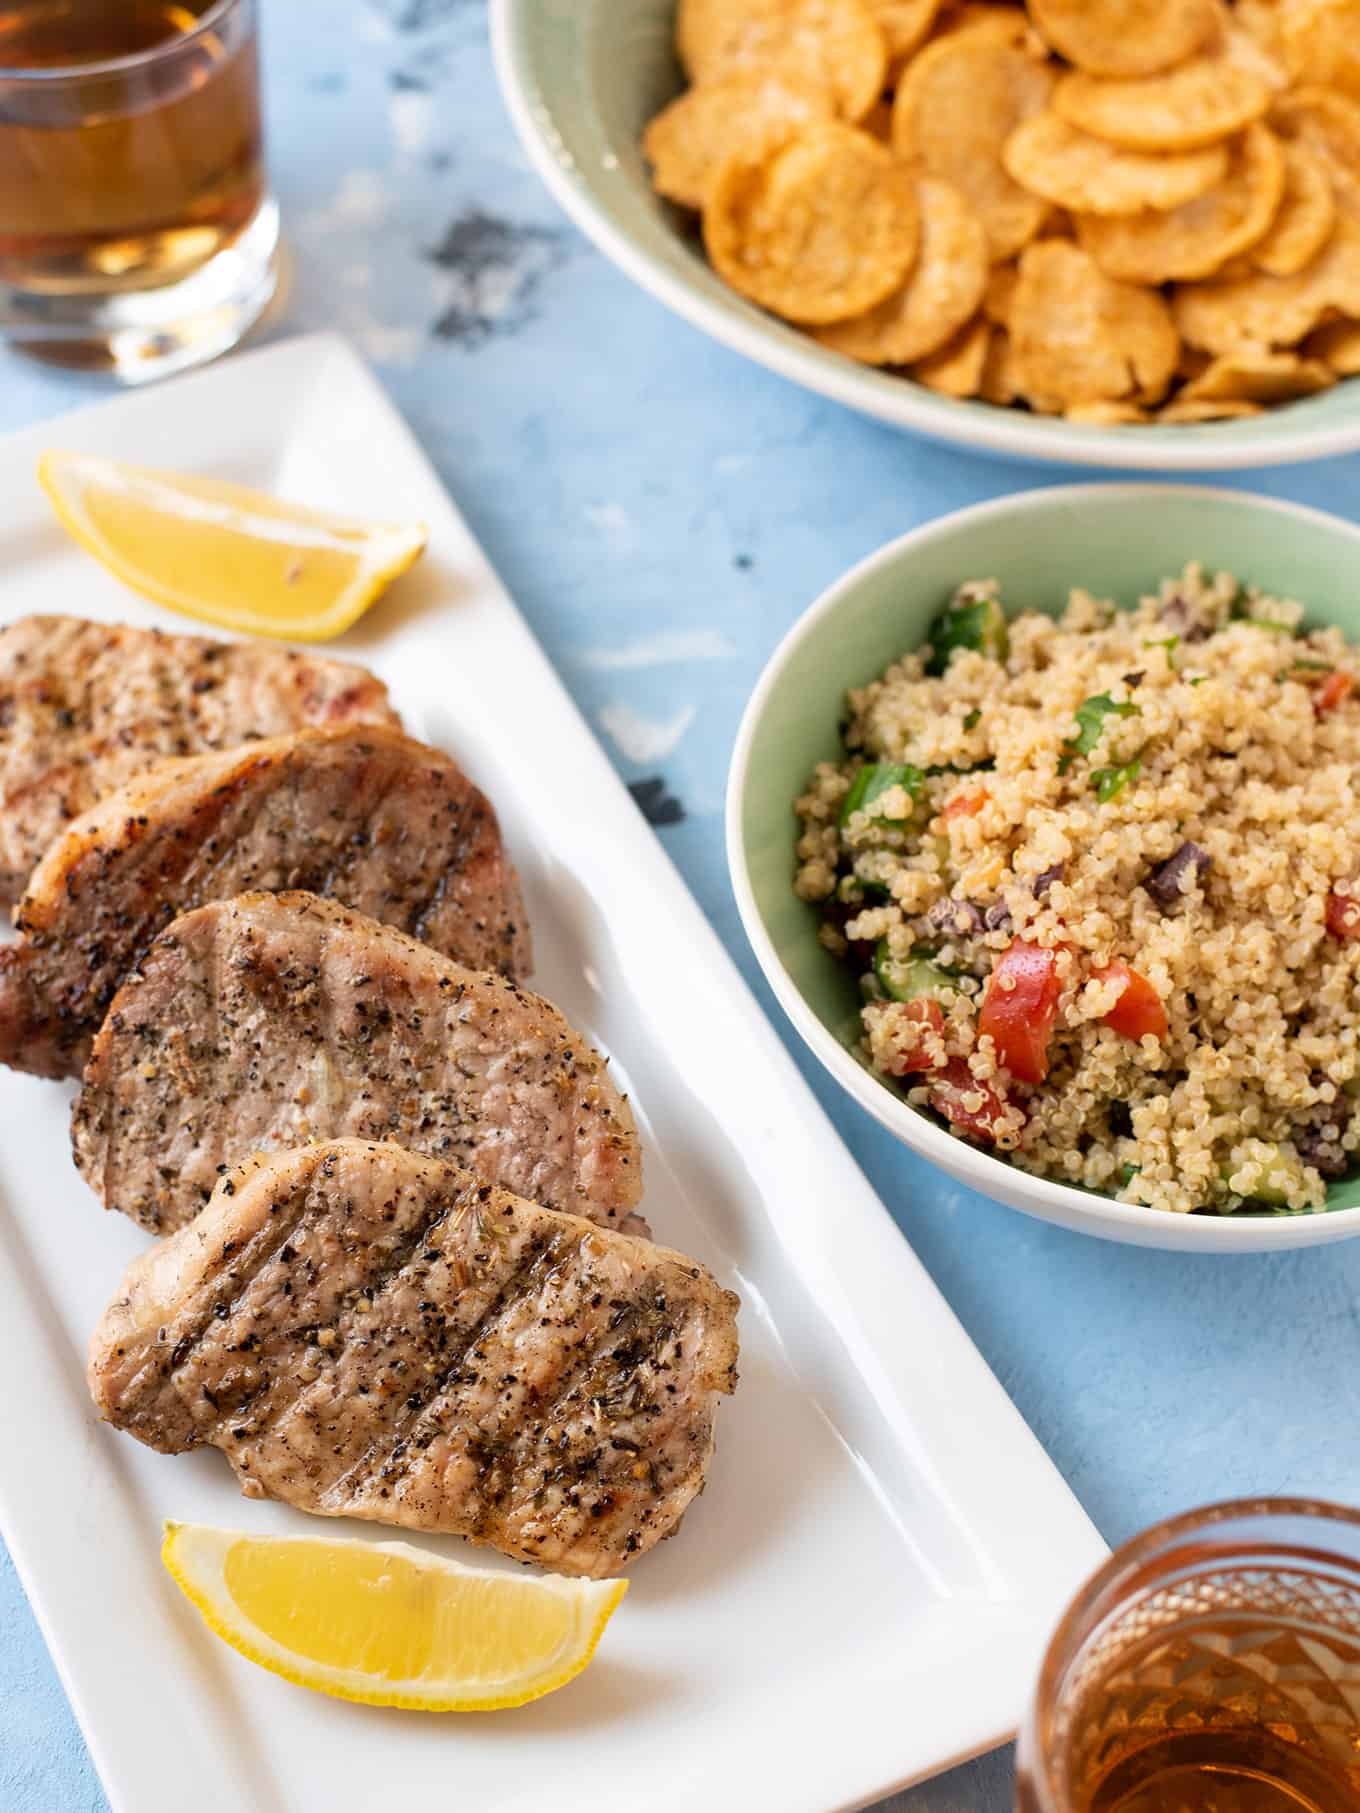 A plate of pork chops and bowl of quinoa salad on a table.